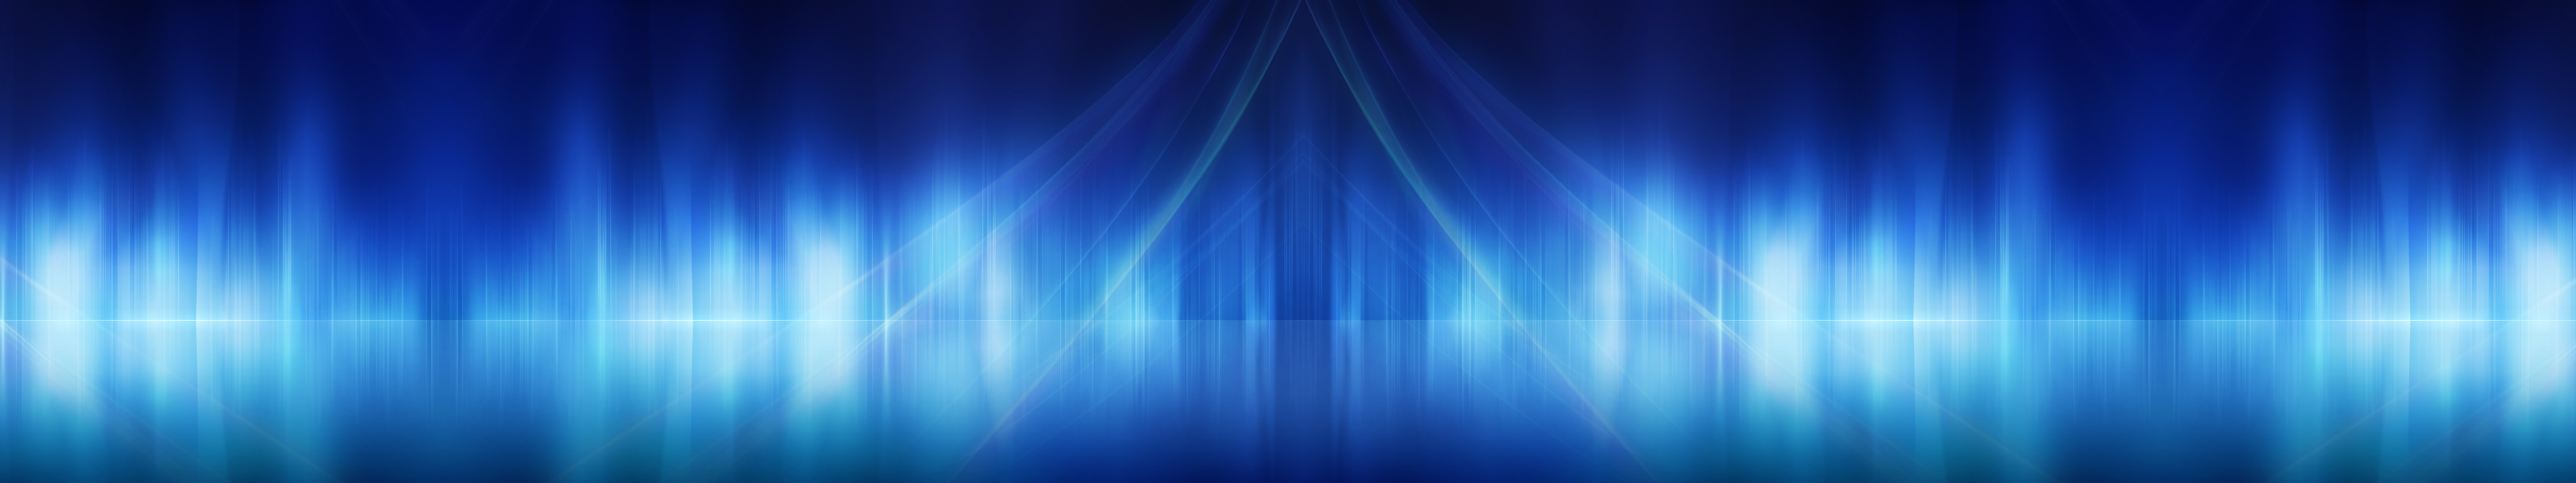 Blue Aura Eyefinity Wallpaper By Brentjansma Pictures